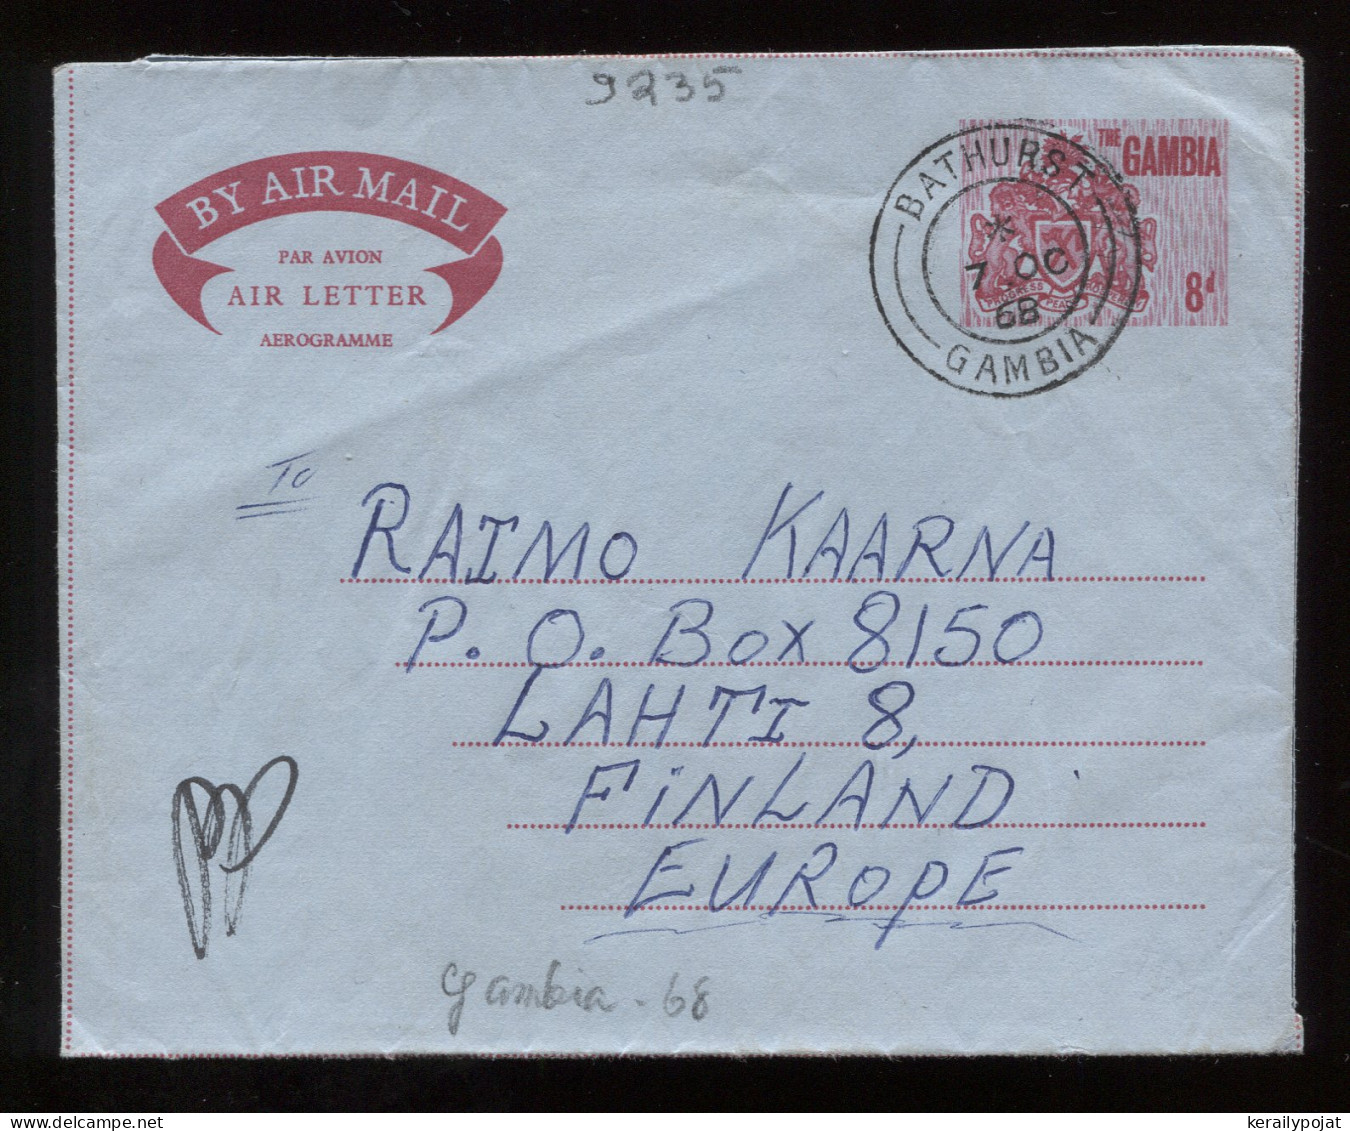 Gambia 1968 Barhurst Air Letter To Finland__(9235) - Gambia (1965-...)